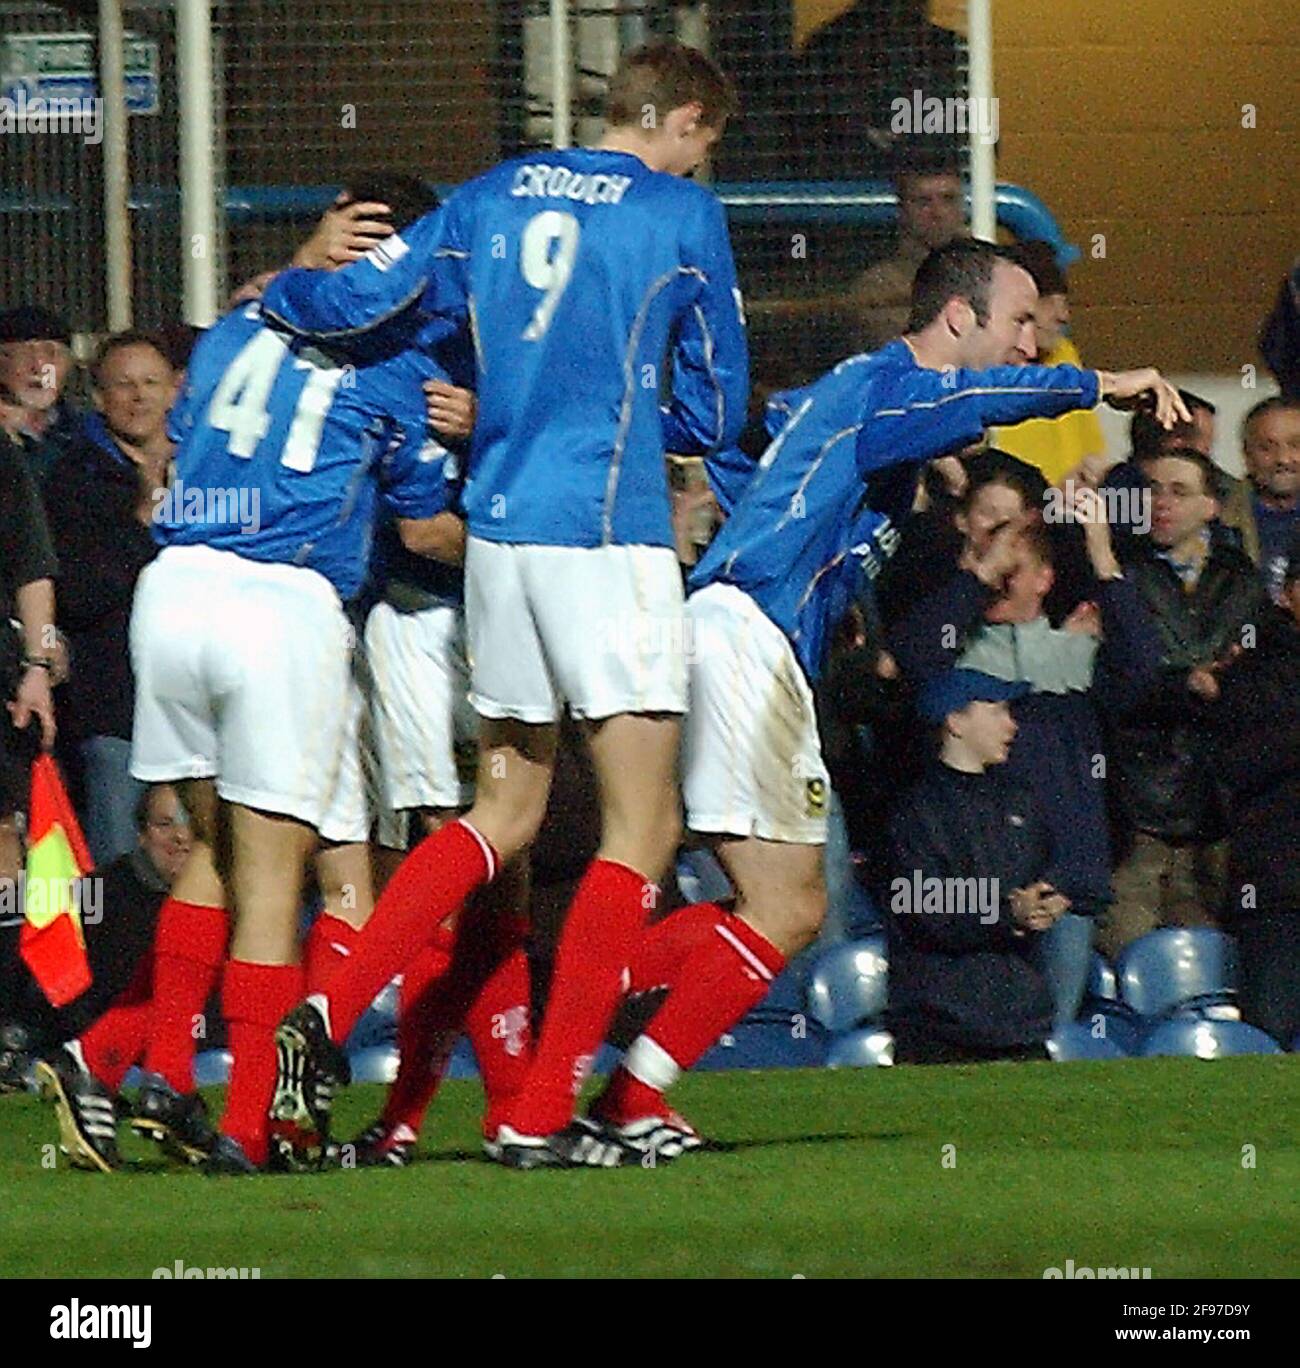 PORTSMOUTH V WIMBLEDON. SEAN DERRY TURNS AWAY AS PORTSMOUTH PLAYERS CONGRATULATE LEO BIAGINI (41) PIC MIKE WALKER, 2002 Stock Photo